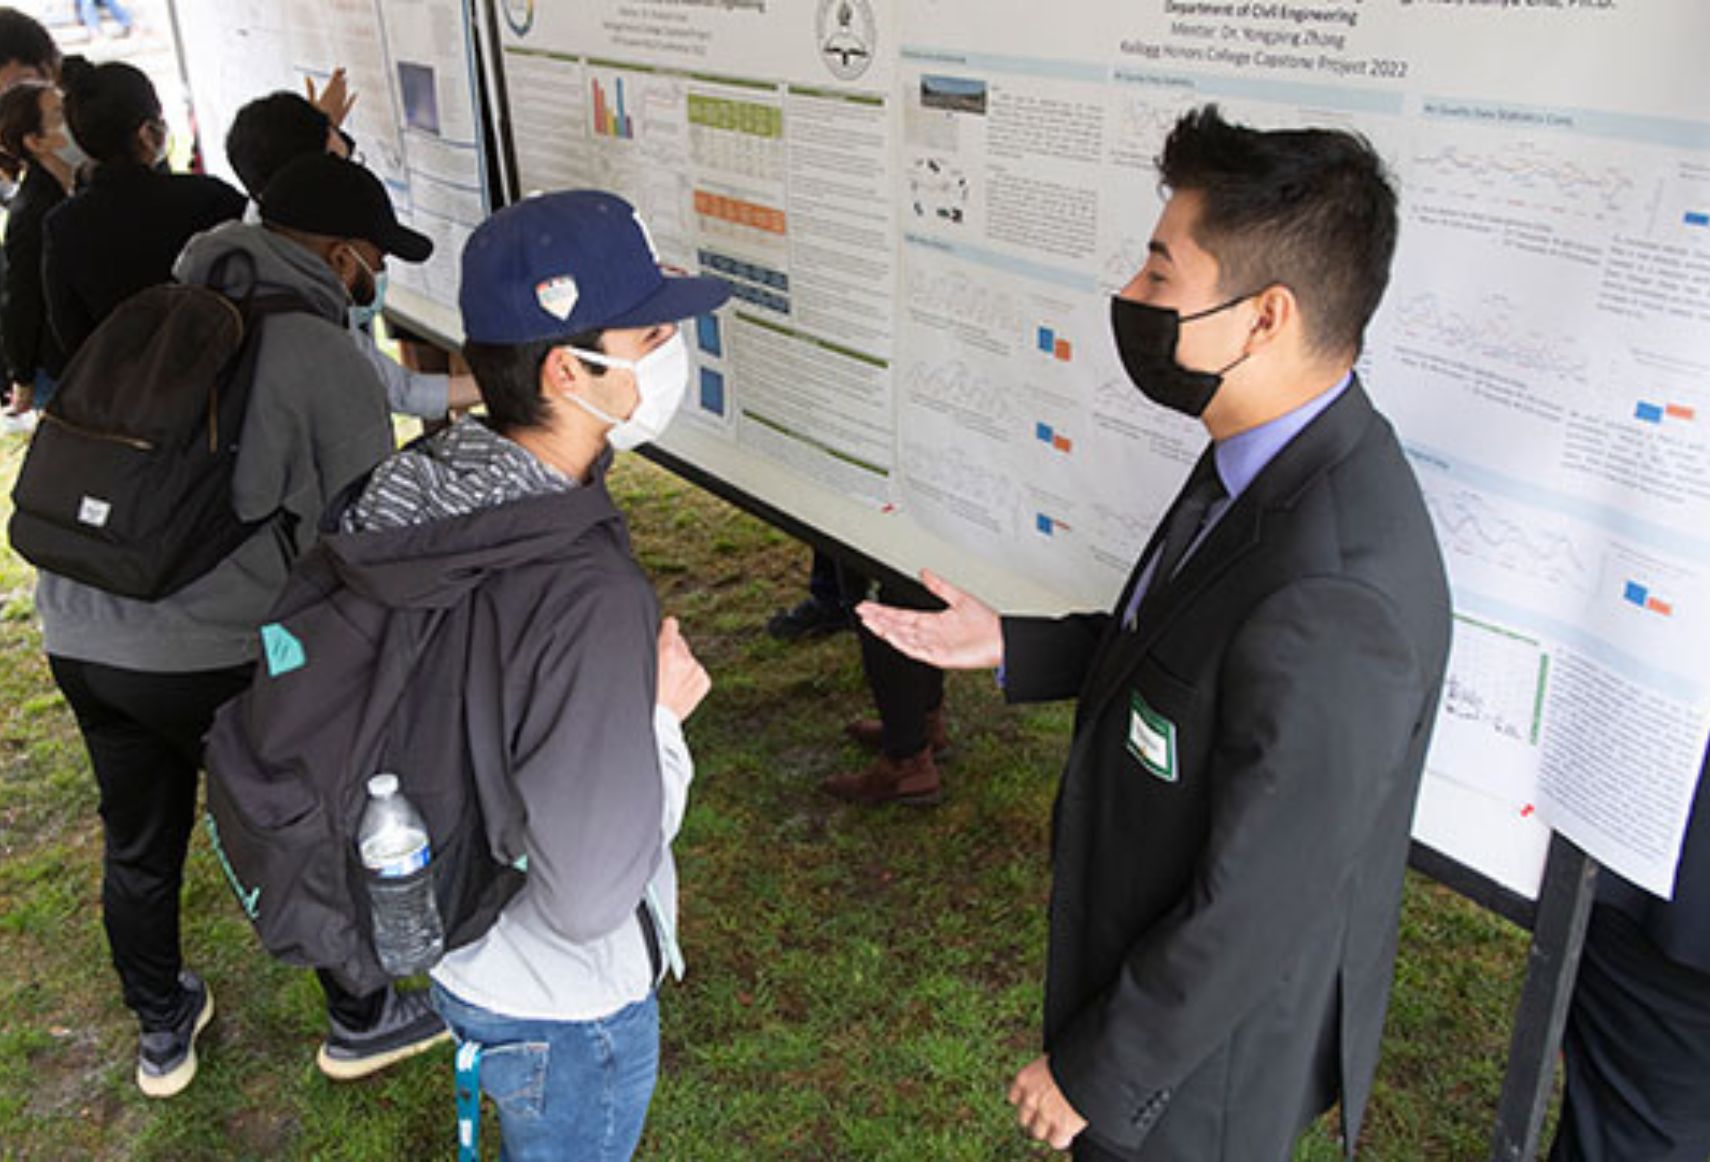 Student Research to Be Highlighted at 11th Annual RSCA Conference